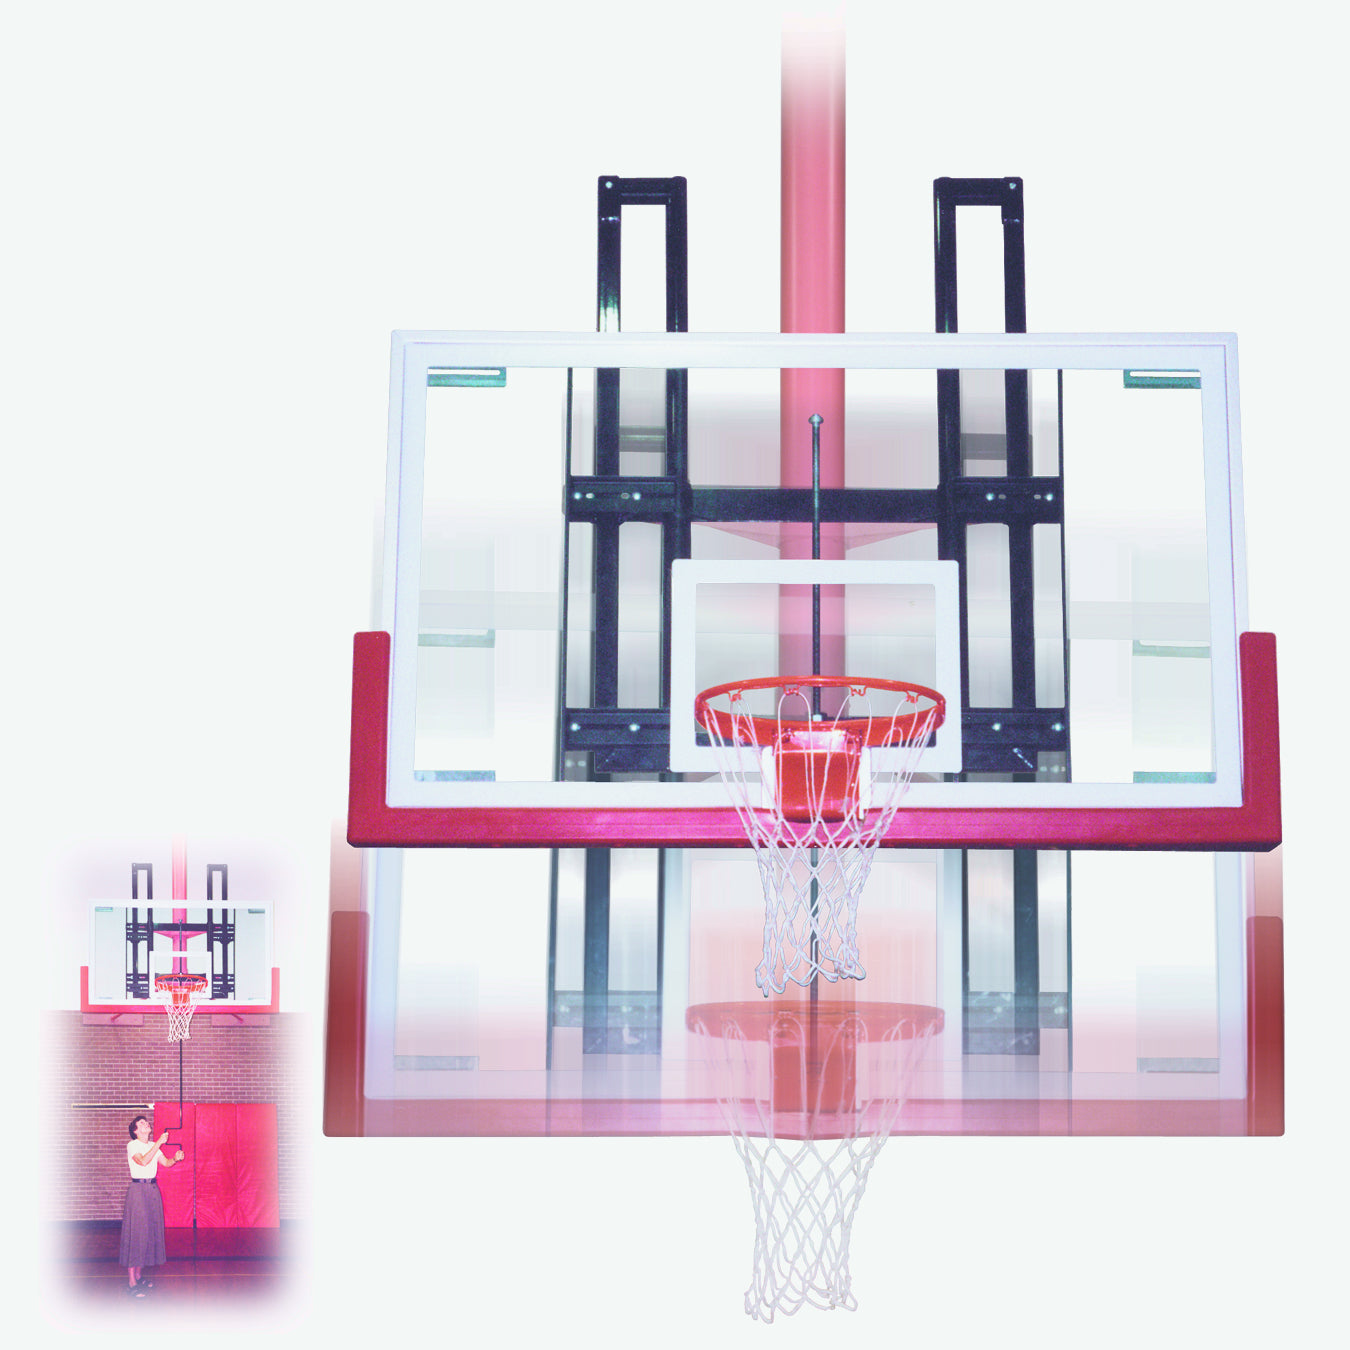 First Team FoldaMount82 Victory Wall Mounted Basketball Goal - 42" x72" Tempered Glass